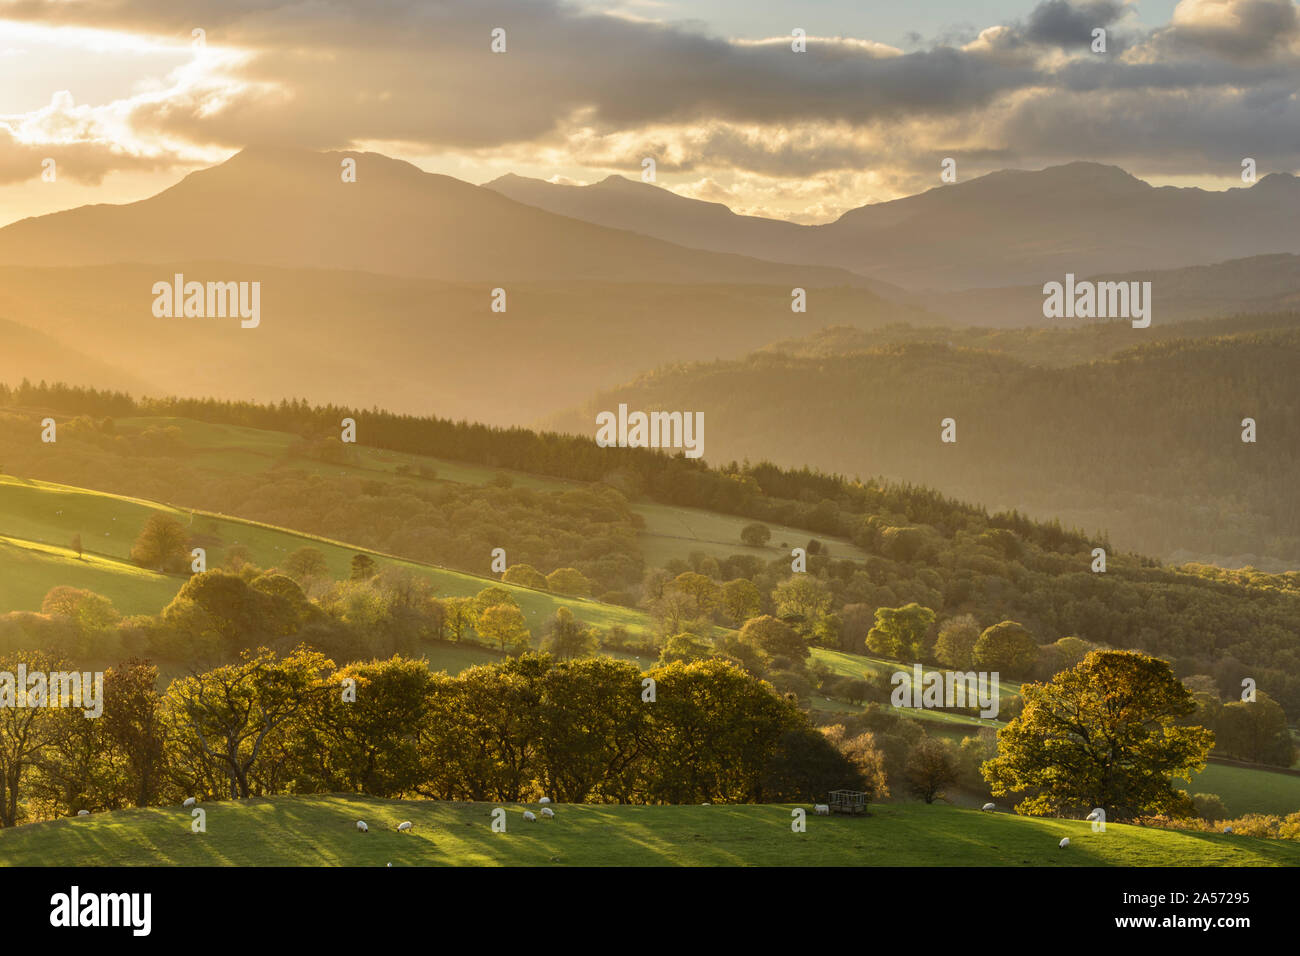 Landscape view over the forest of Betws-y-Coed, Snowdonia, with Moel Siabod and surrounding mountains towering above. Stock Photo